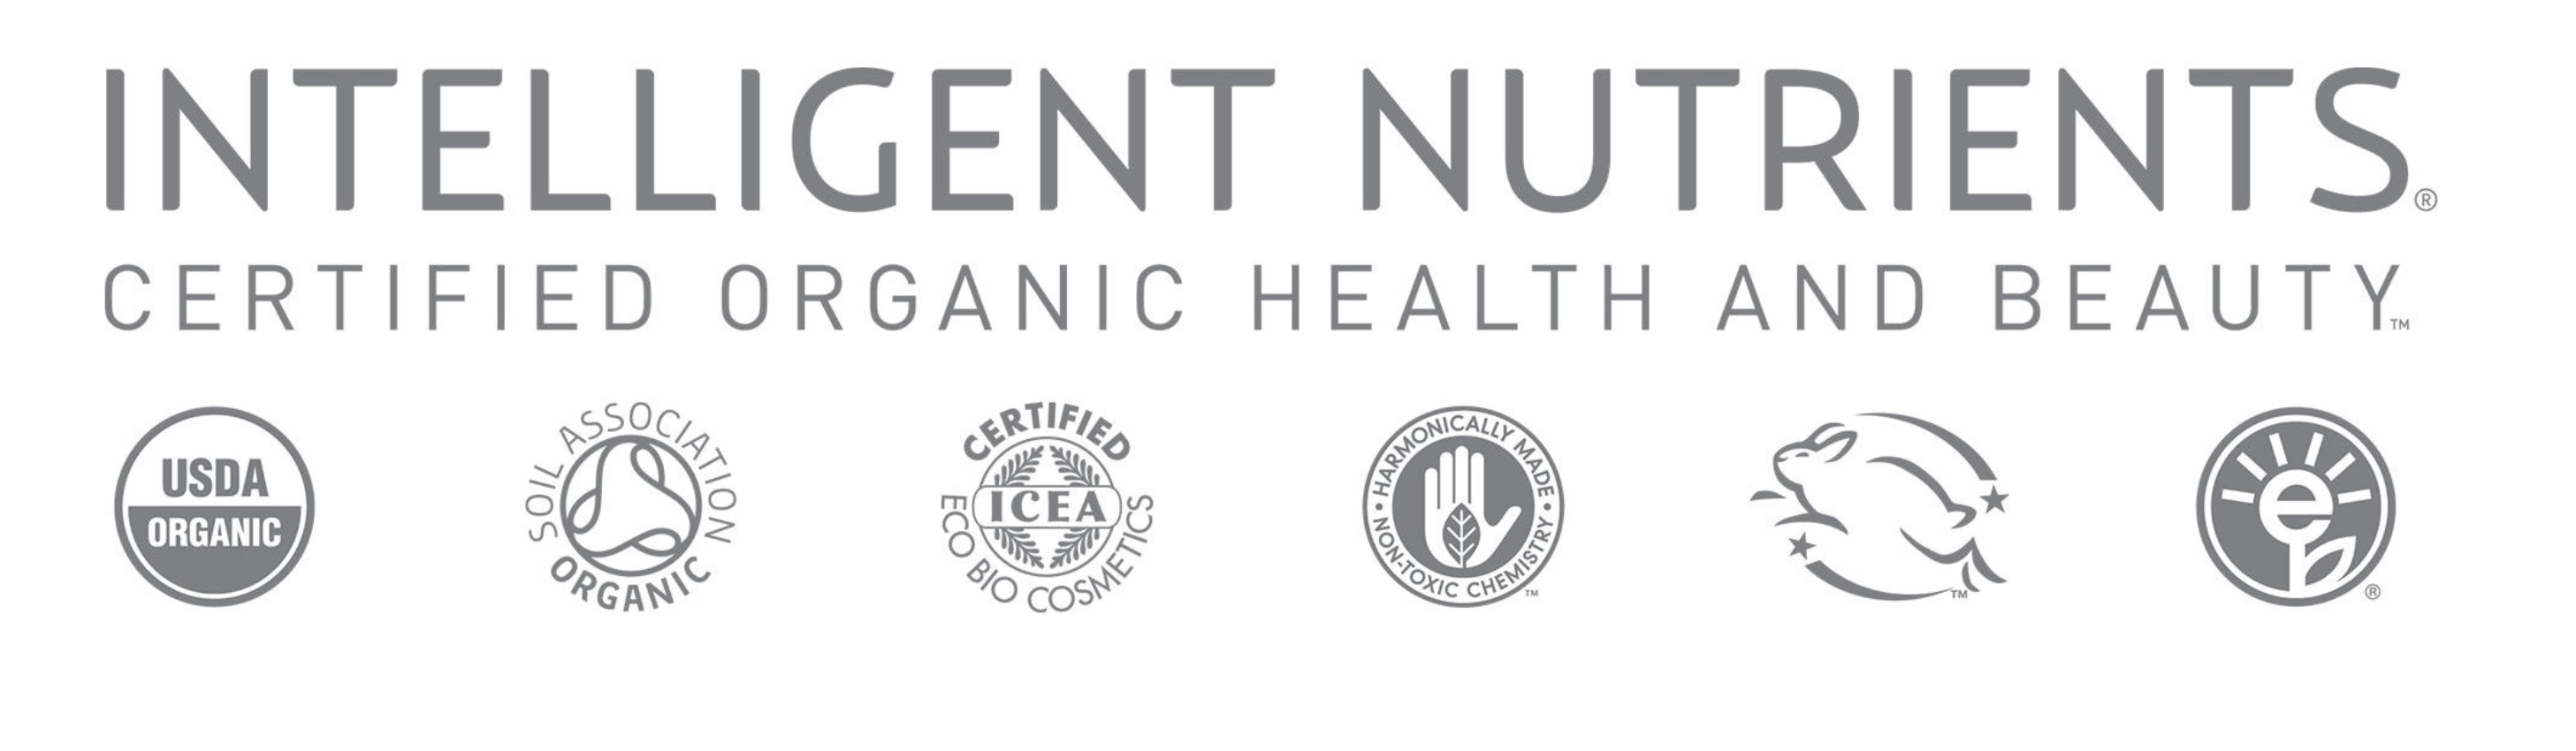 Intelligent Nutrients - Certified Organic Health and Beauty